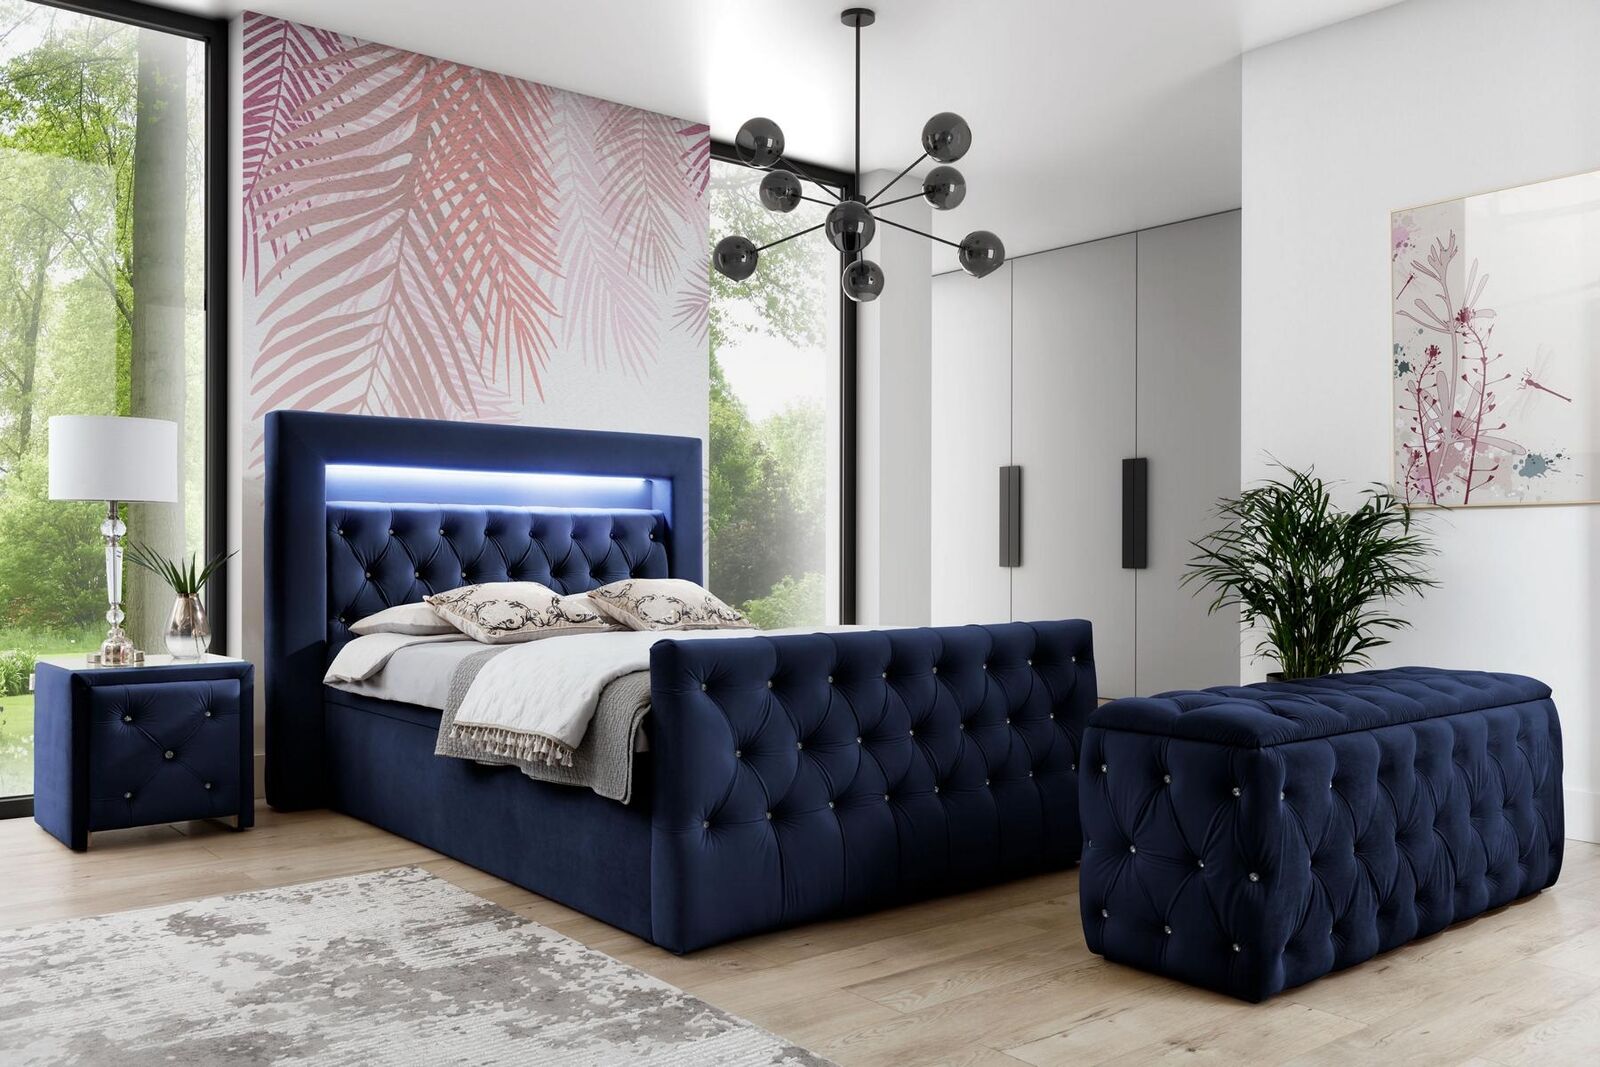 Dark blue Chesterfield bedroom furniture LED double bed bedside consoles